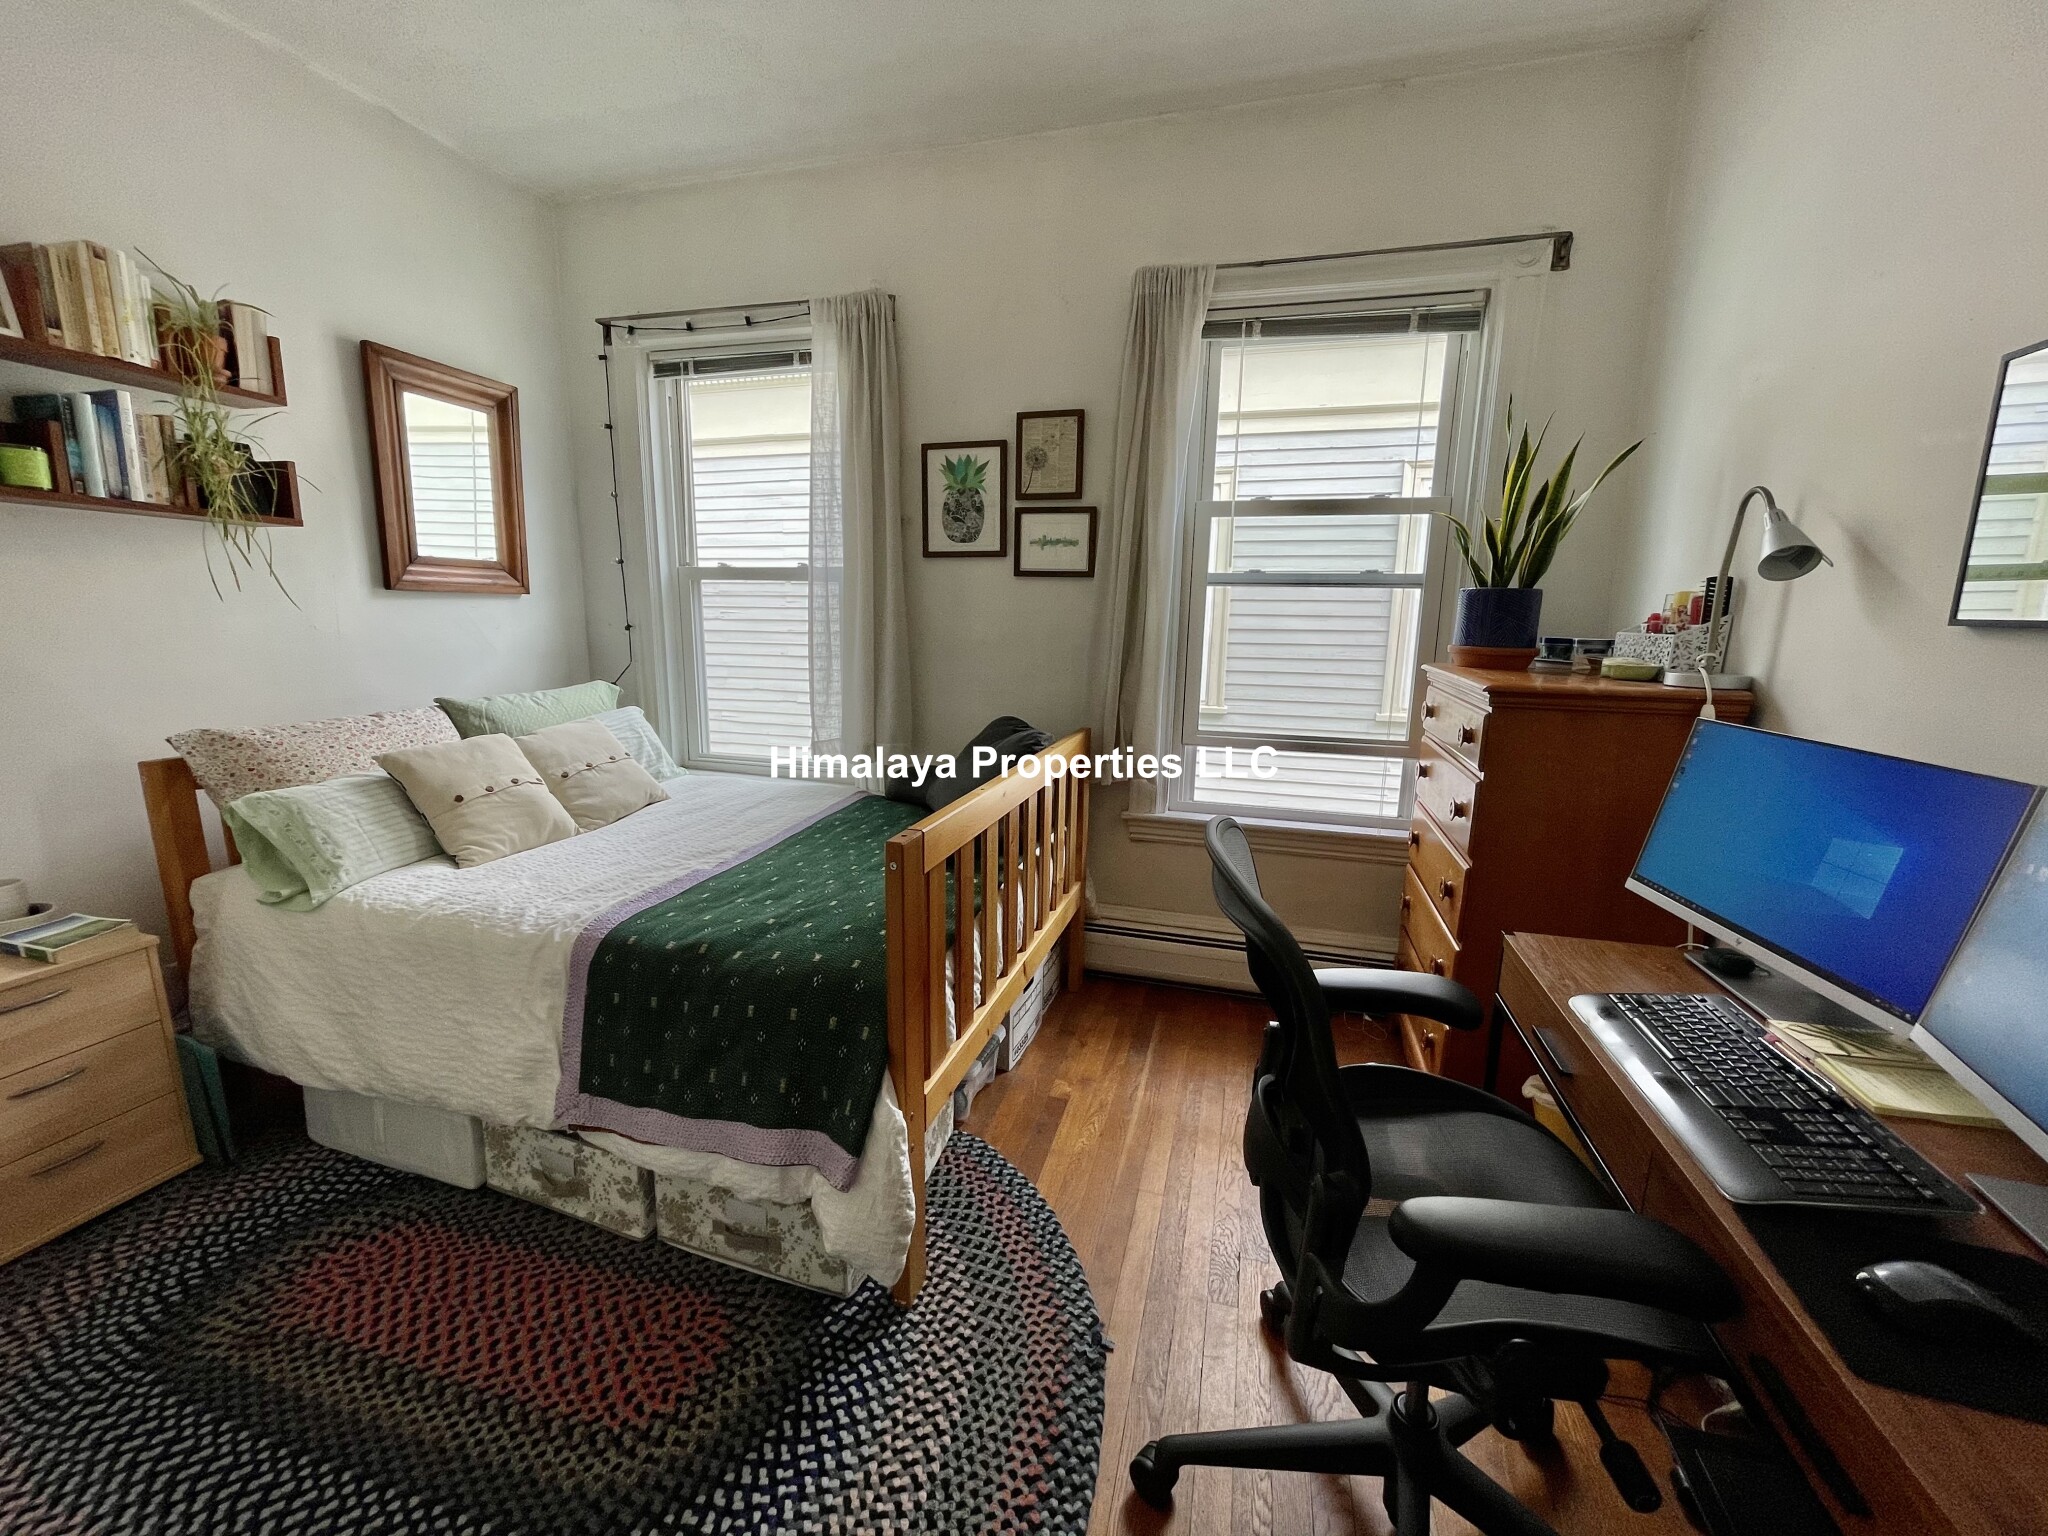 Photos of apartment on Fayette St.,Cambridge MA 02139